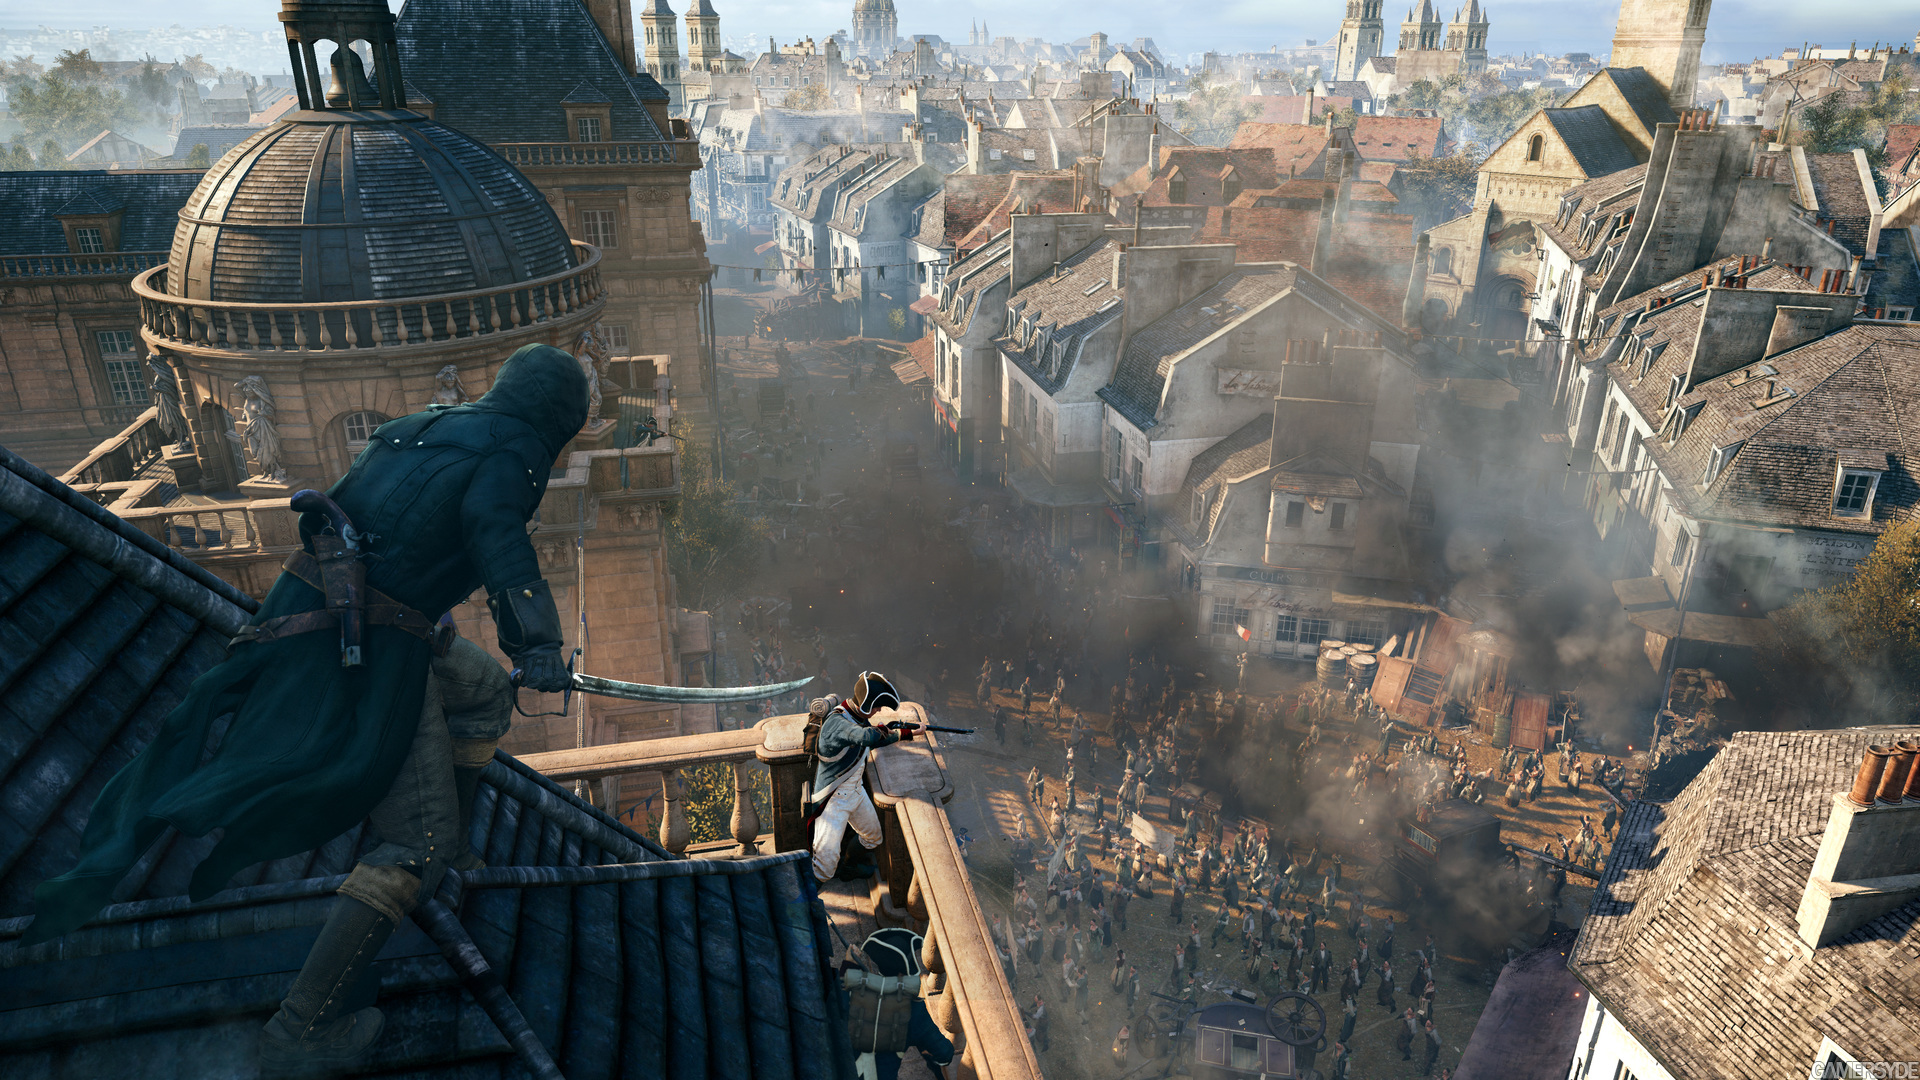 http://images.gamersyde.com/image_assassin_s_creed_unity-25732-2908_0001.jpg